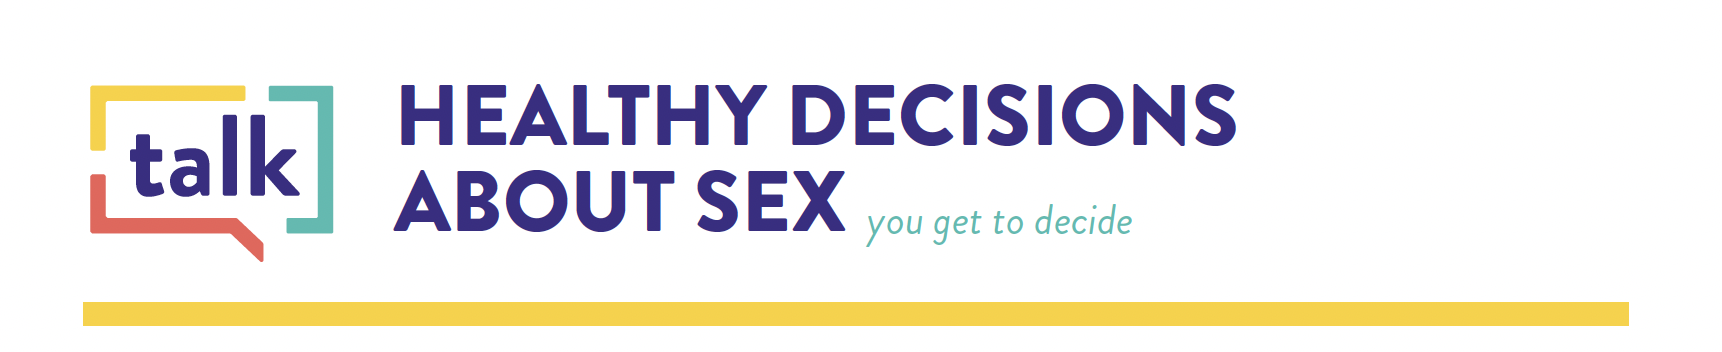 Healthy Decisions about Sex